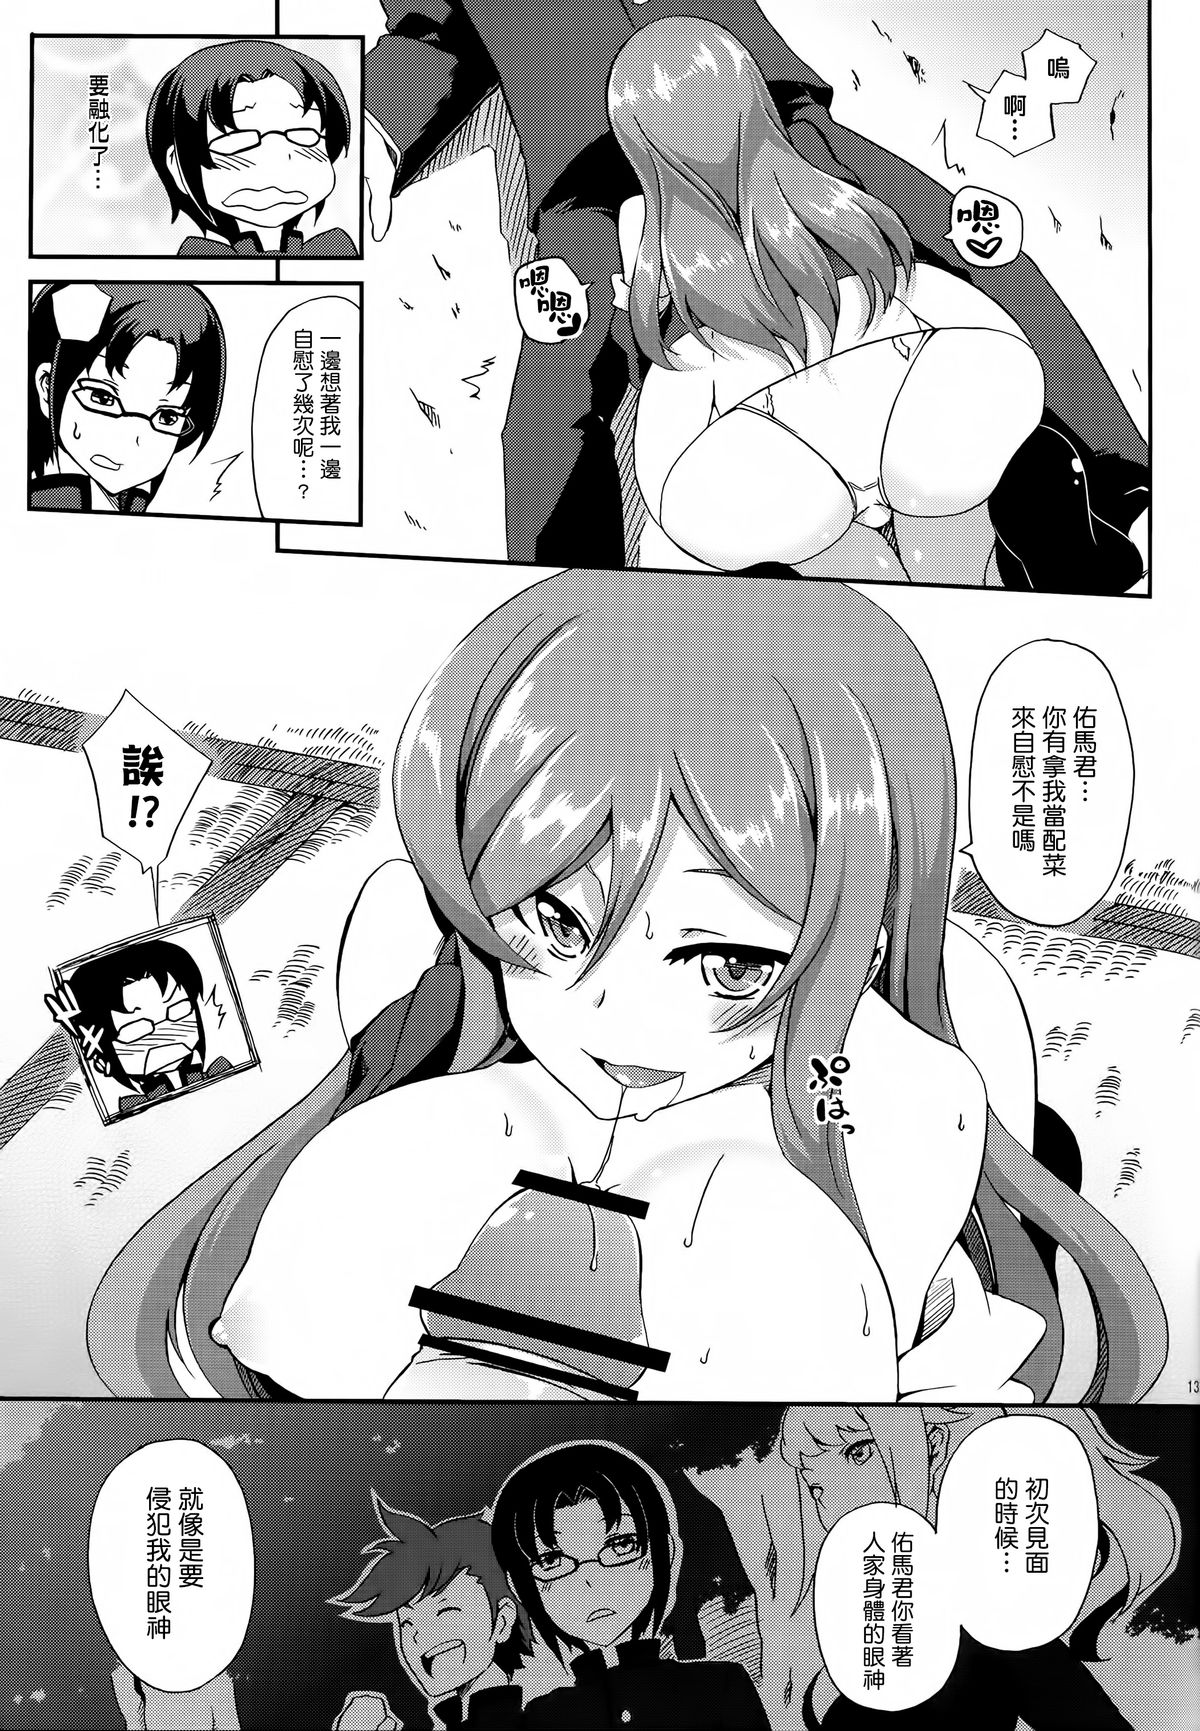 (COMIC NEXT) [Z-FRONT (Kagato)] Mirai no Onegai (Gundam Build Fighters Try) [Chinese] [我尻故我在個人漢化] page 13 full